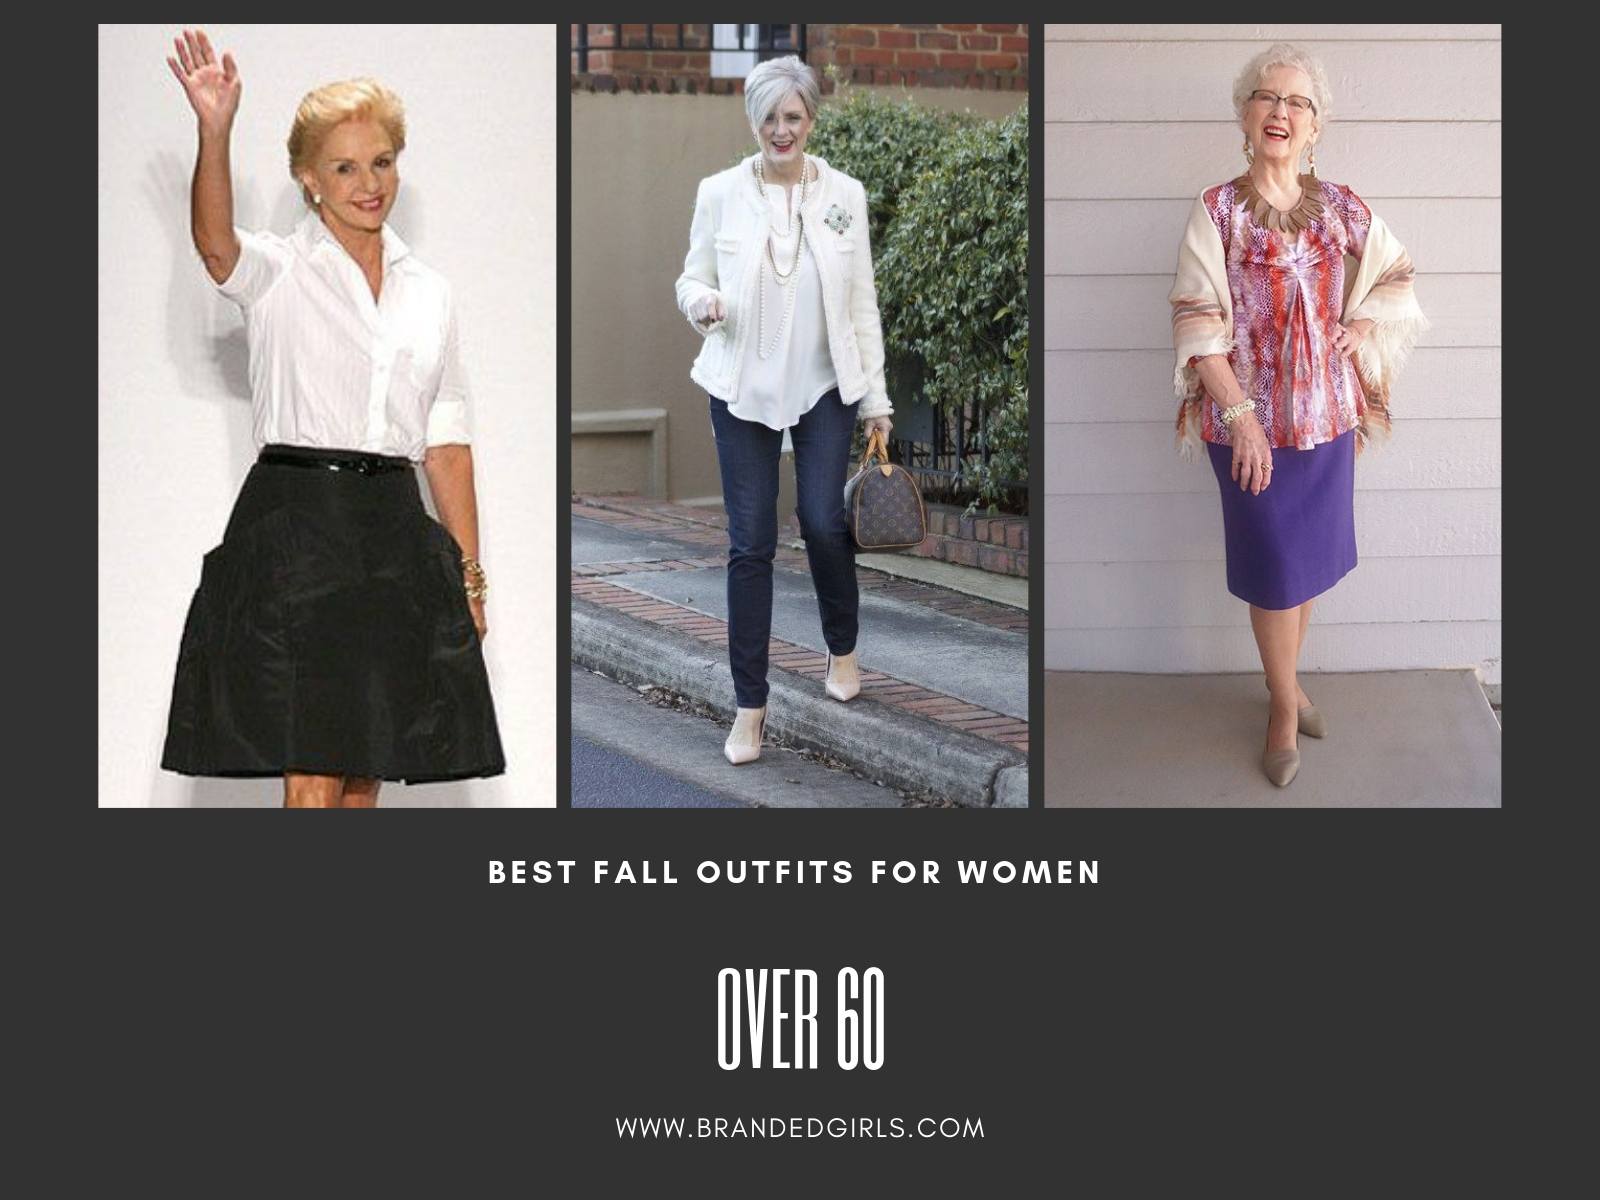 20 Best Fall Outfits For Women Over 60 - Fall Dressing Ideas